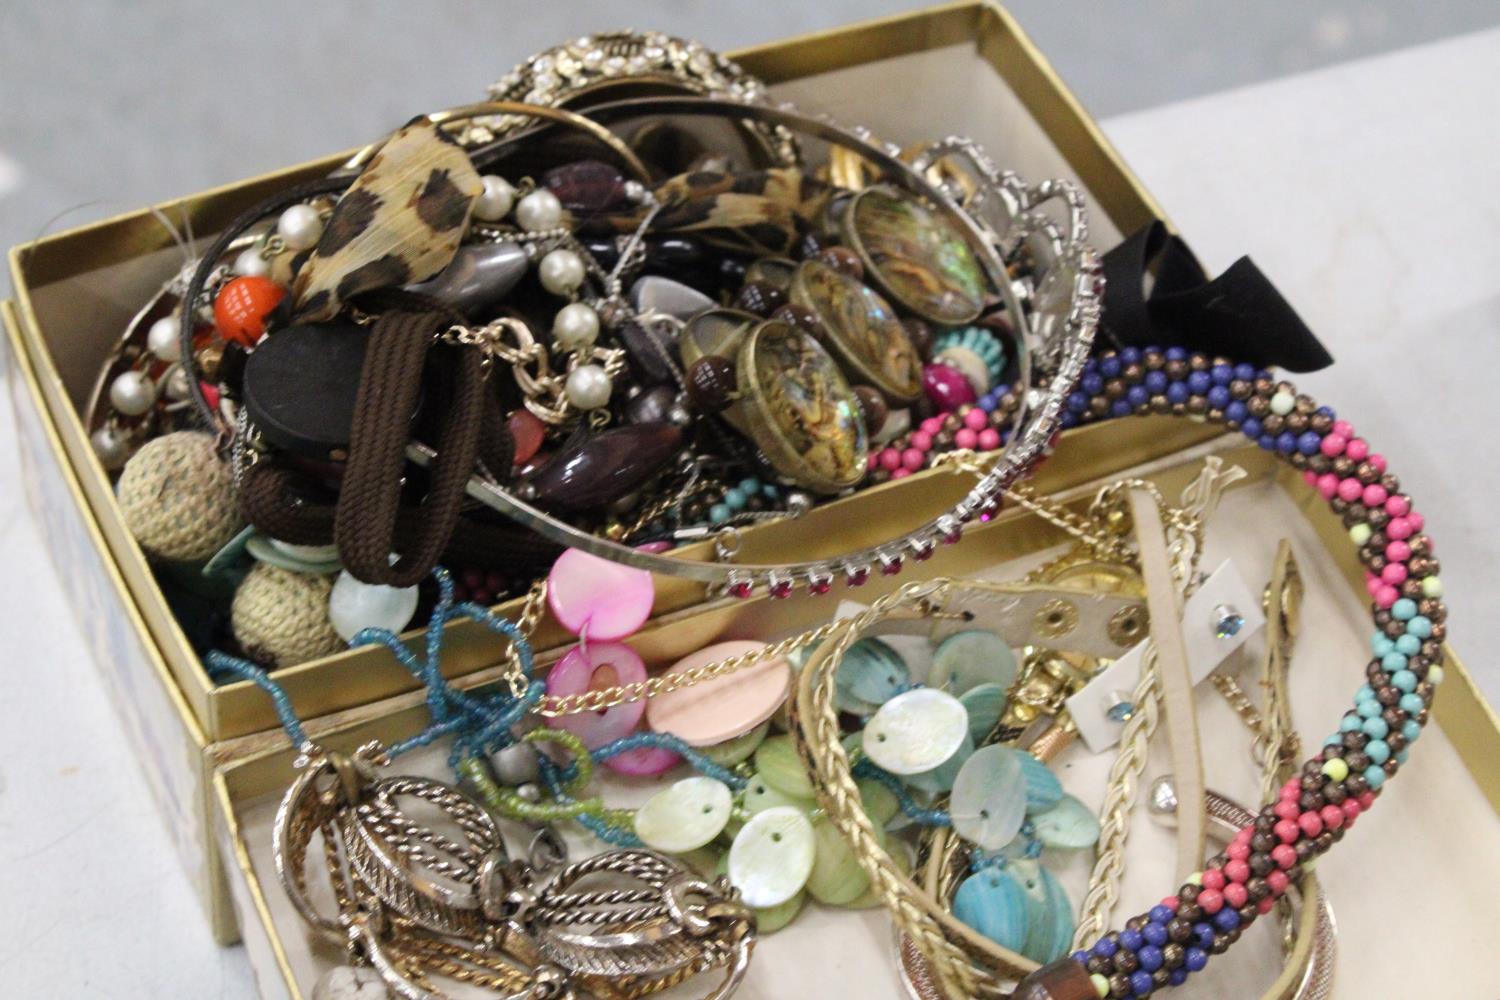 A QUANTITY OF COSTUME JEWELLERY TO INCLUDE NECKLACES, EARRINGS, BANGLES, ETC, IN A DOMED BOX - Image 5 of 5